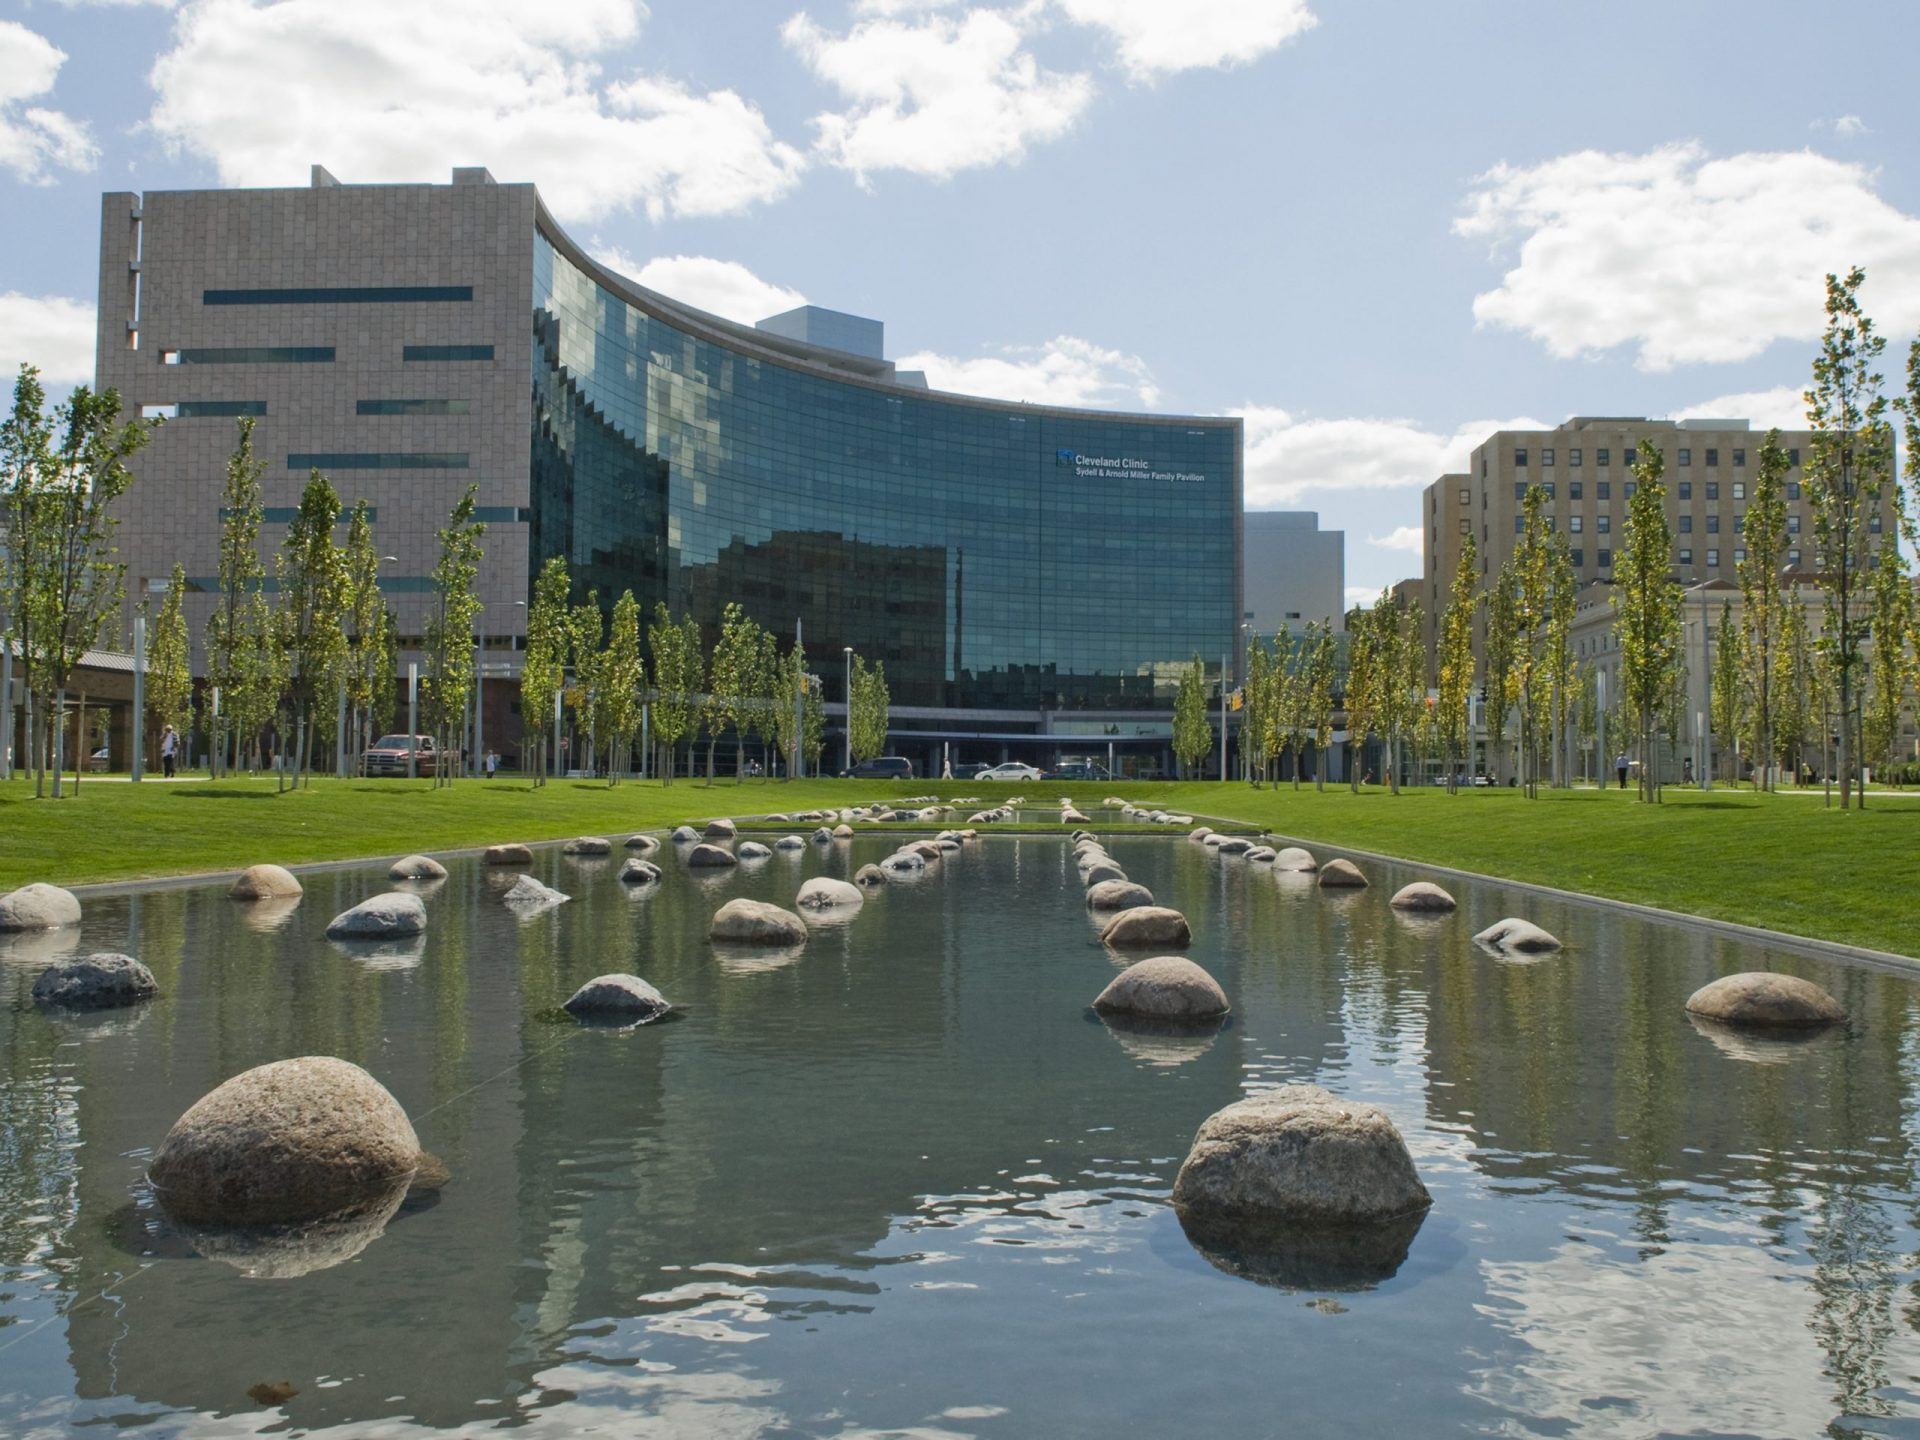 Cleveland Clinic Appoints Chief Digital Officer To Lead Digital Innovation